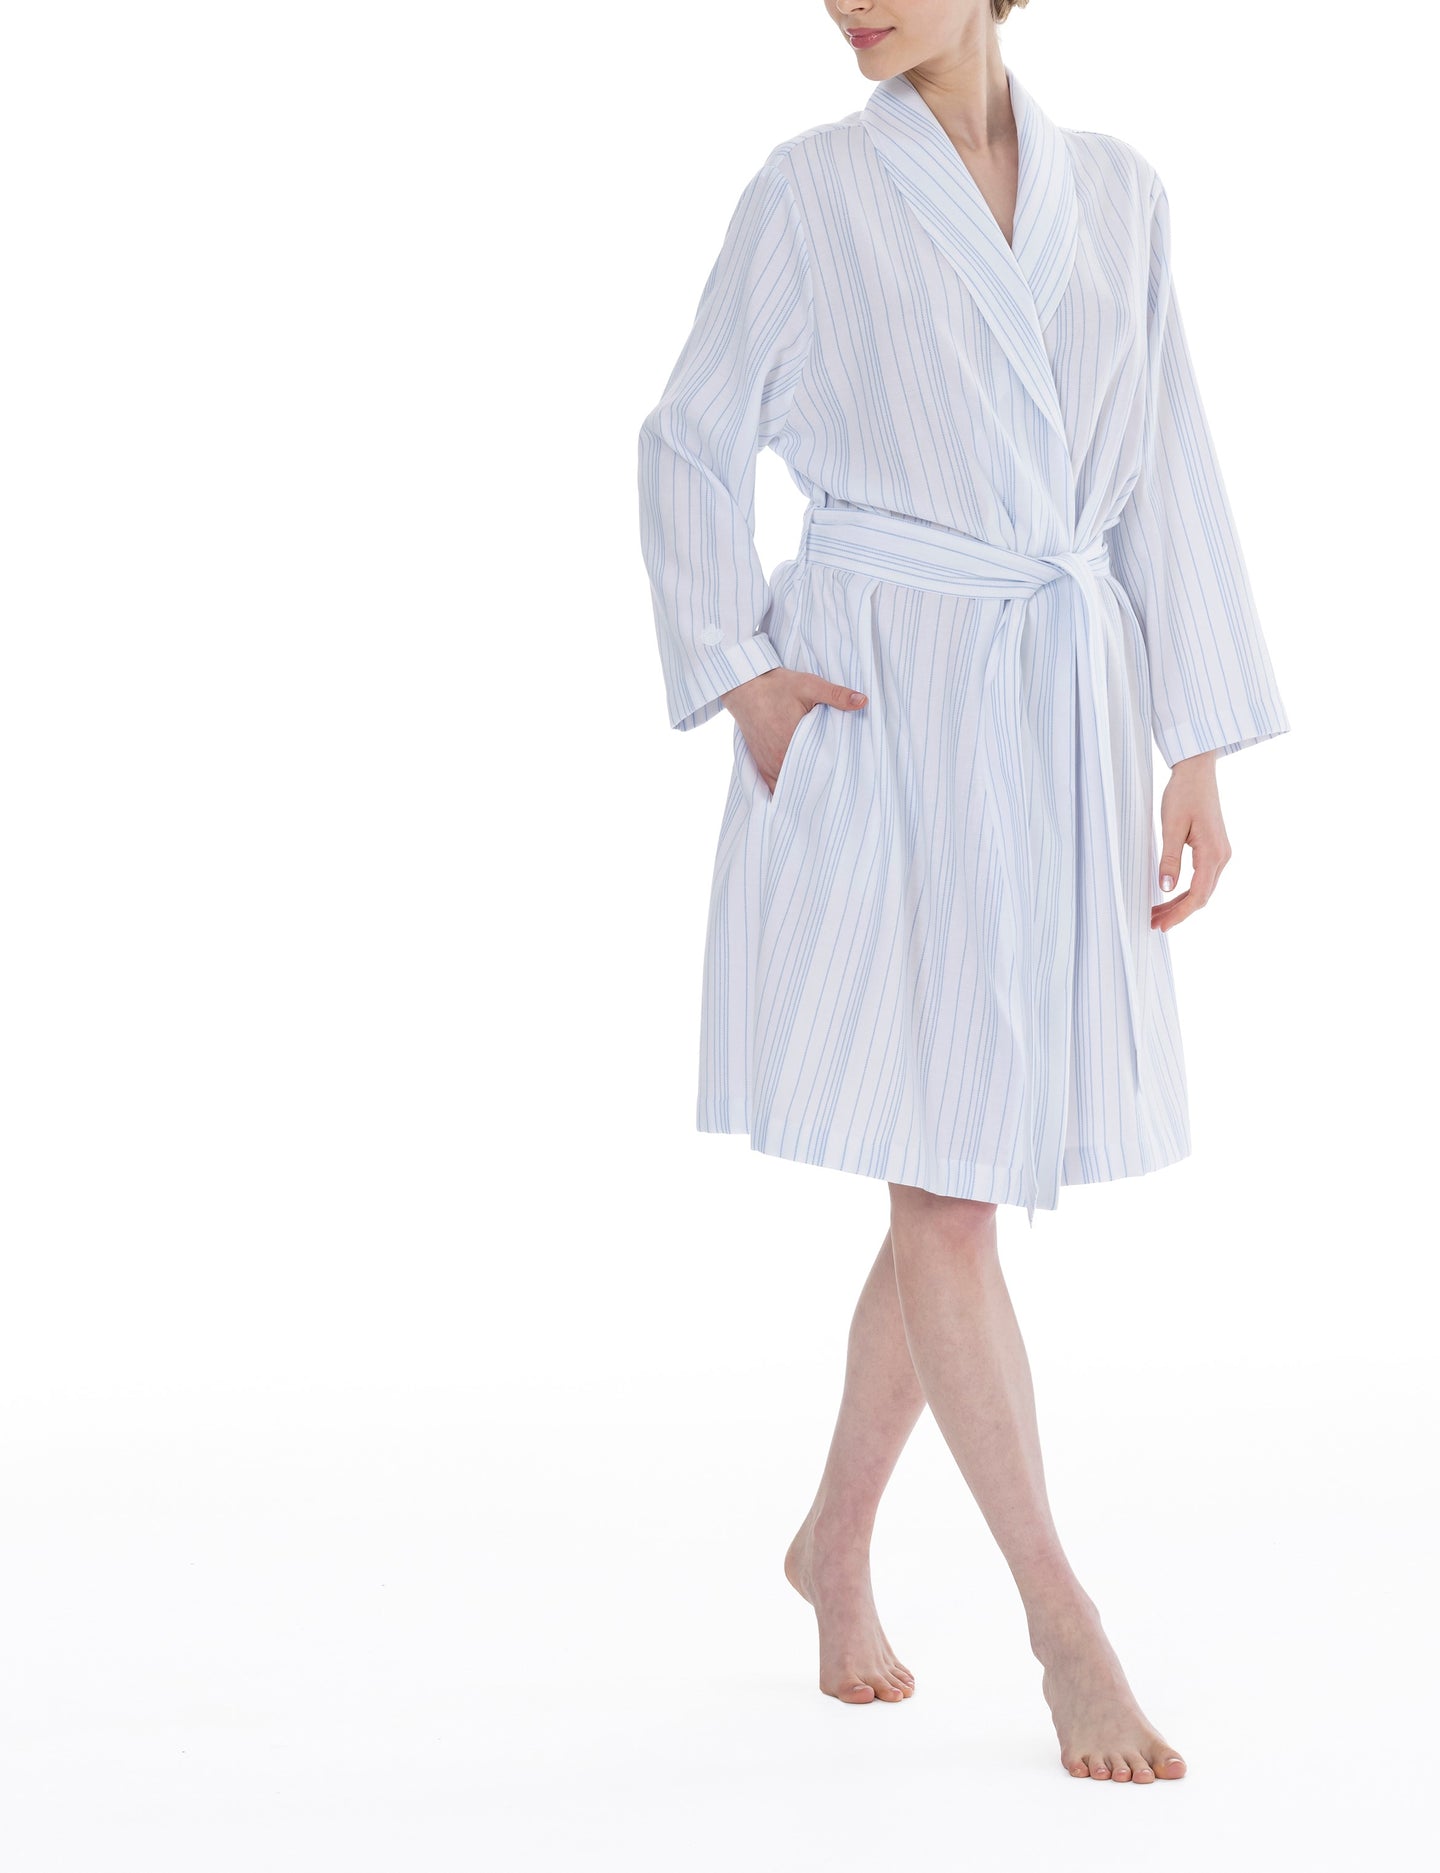 Blue stripe on a white ground, in 100% cashmere soft cotton flannel. Wide belt at the waist with a shawl collar. Inverted side pocket. Soft, stylish and comfortable for perfect lounging. Celestine nightwear, dressing gowns, short robes and pyjamas drop from the shoulder, therefore one size fits all.  Fabric composition: 100% Cotton Flannel. Made in Germany. Machine Washable.